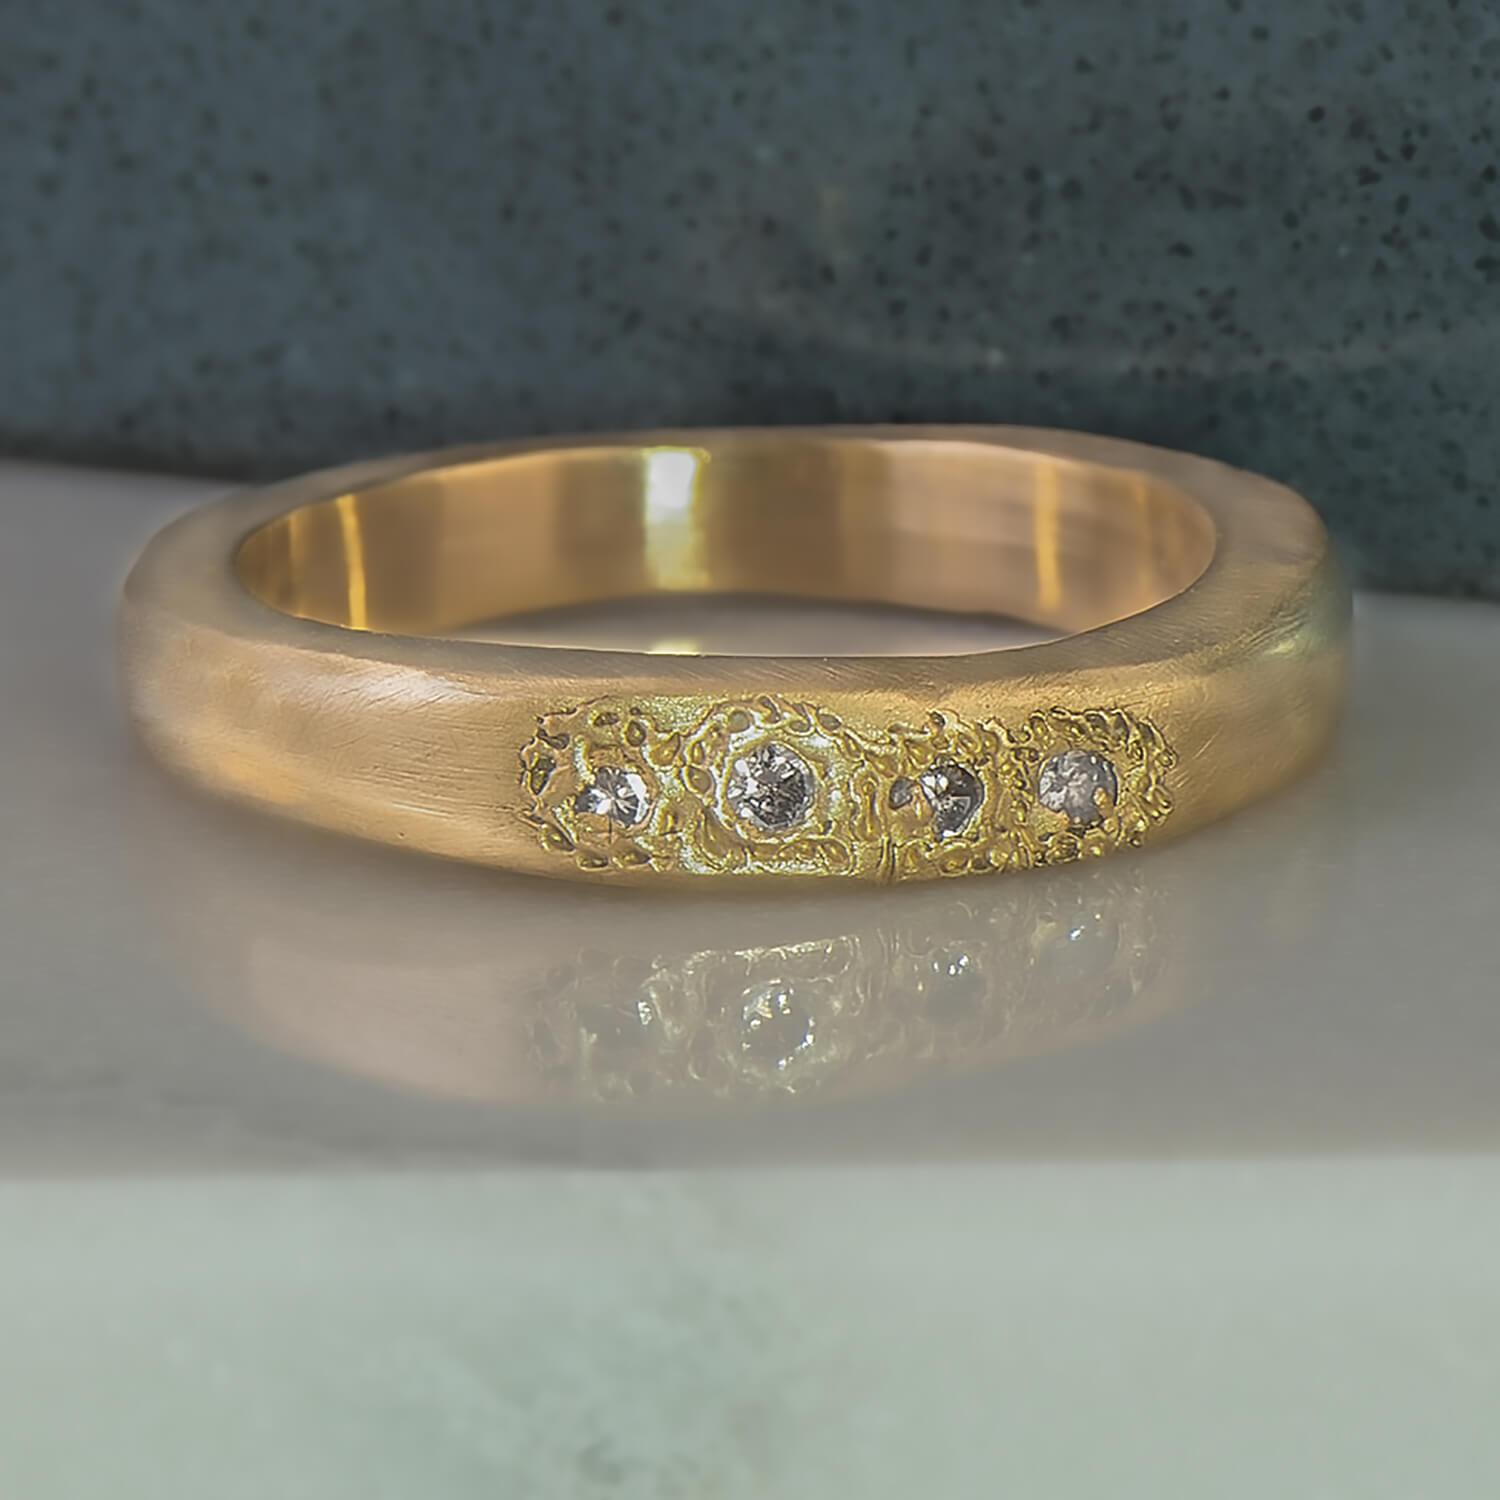 Recycled 14 karat yellow gold satin finished signet ring. The band is an irregular rectangular shape housing four, 2mm natural blue sapphires in which have been set in cast.